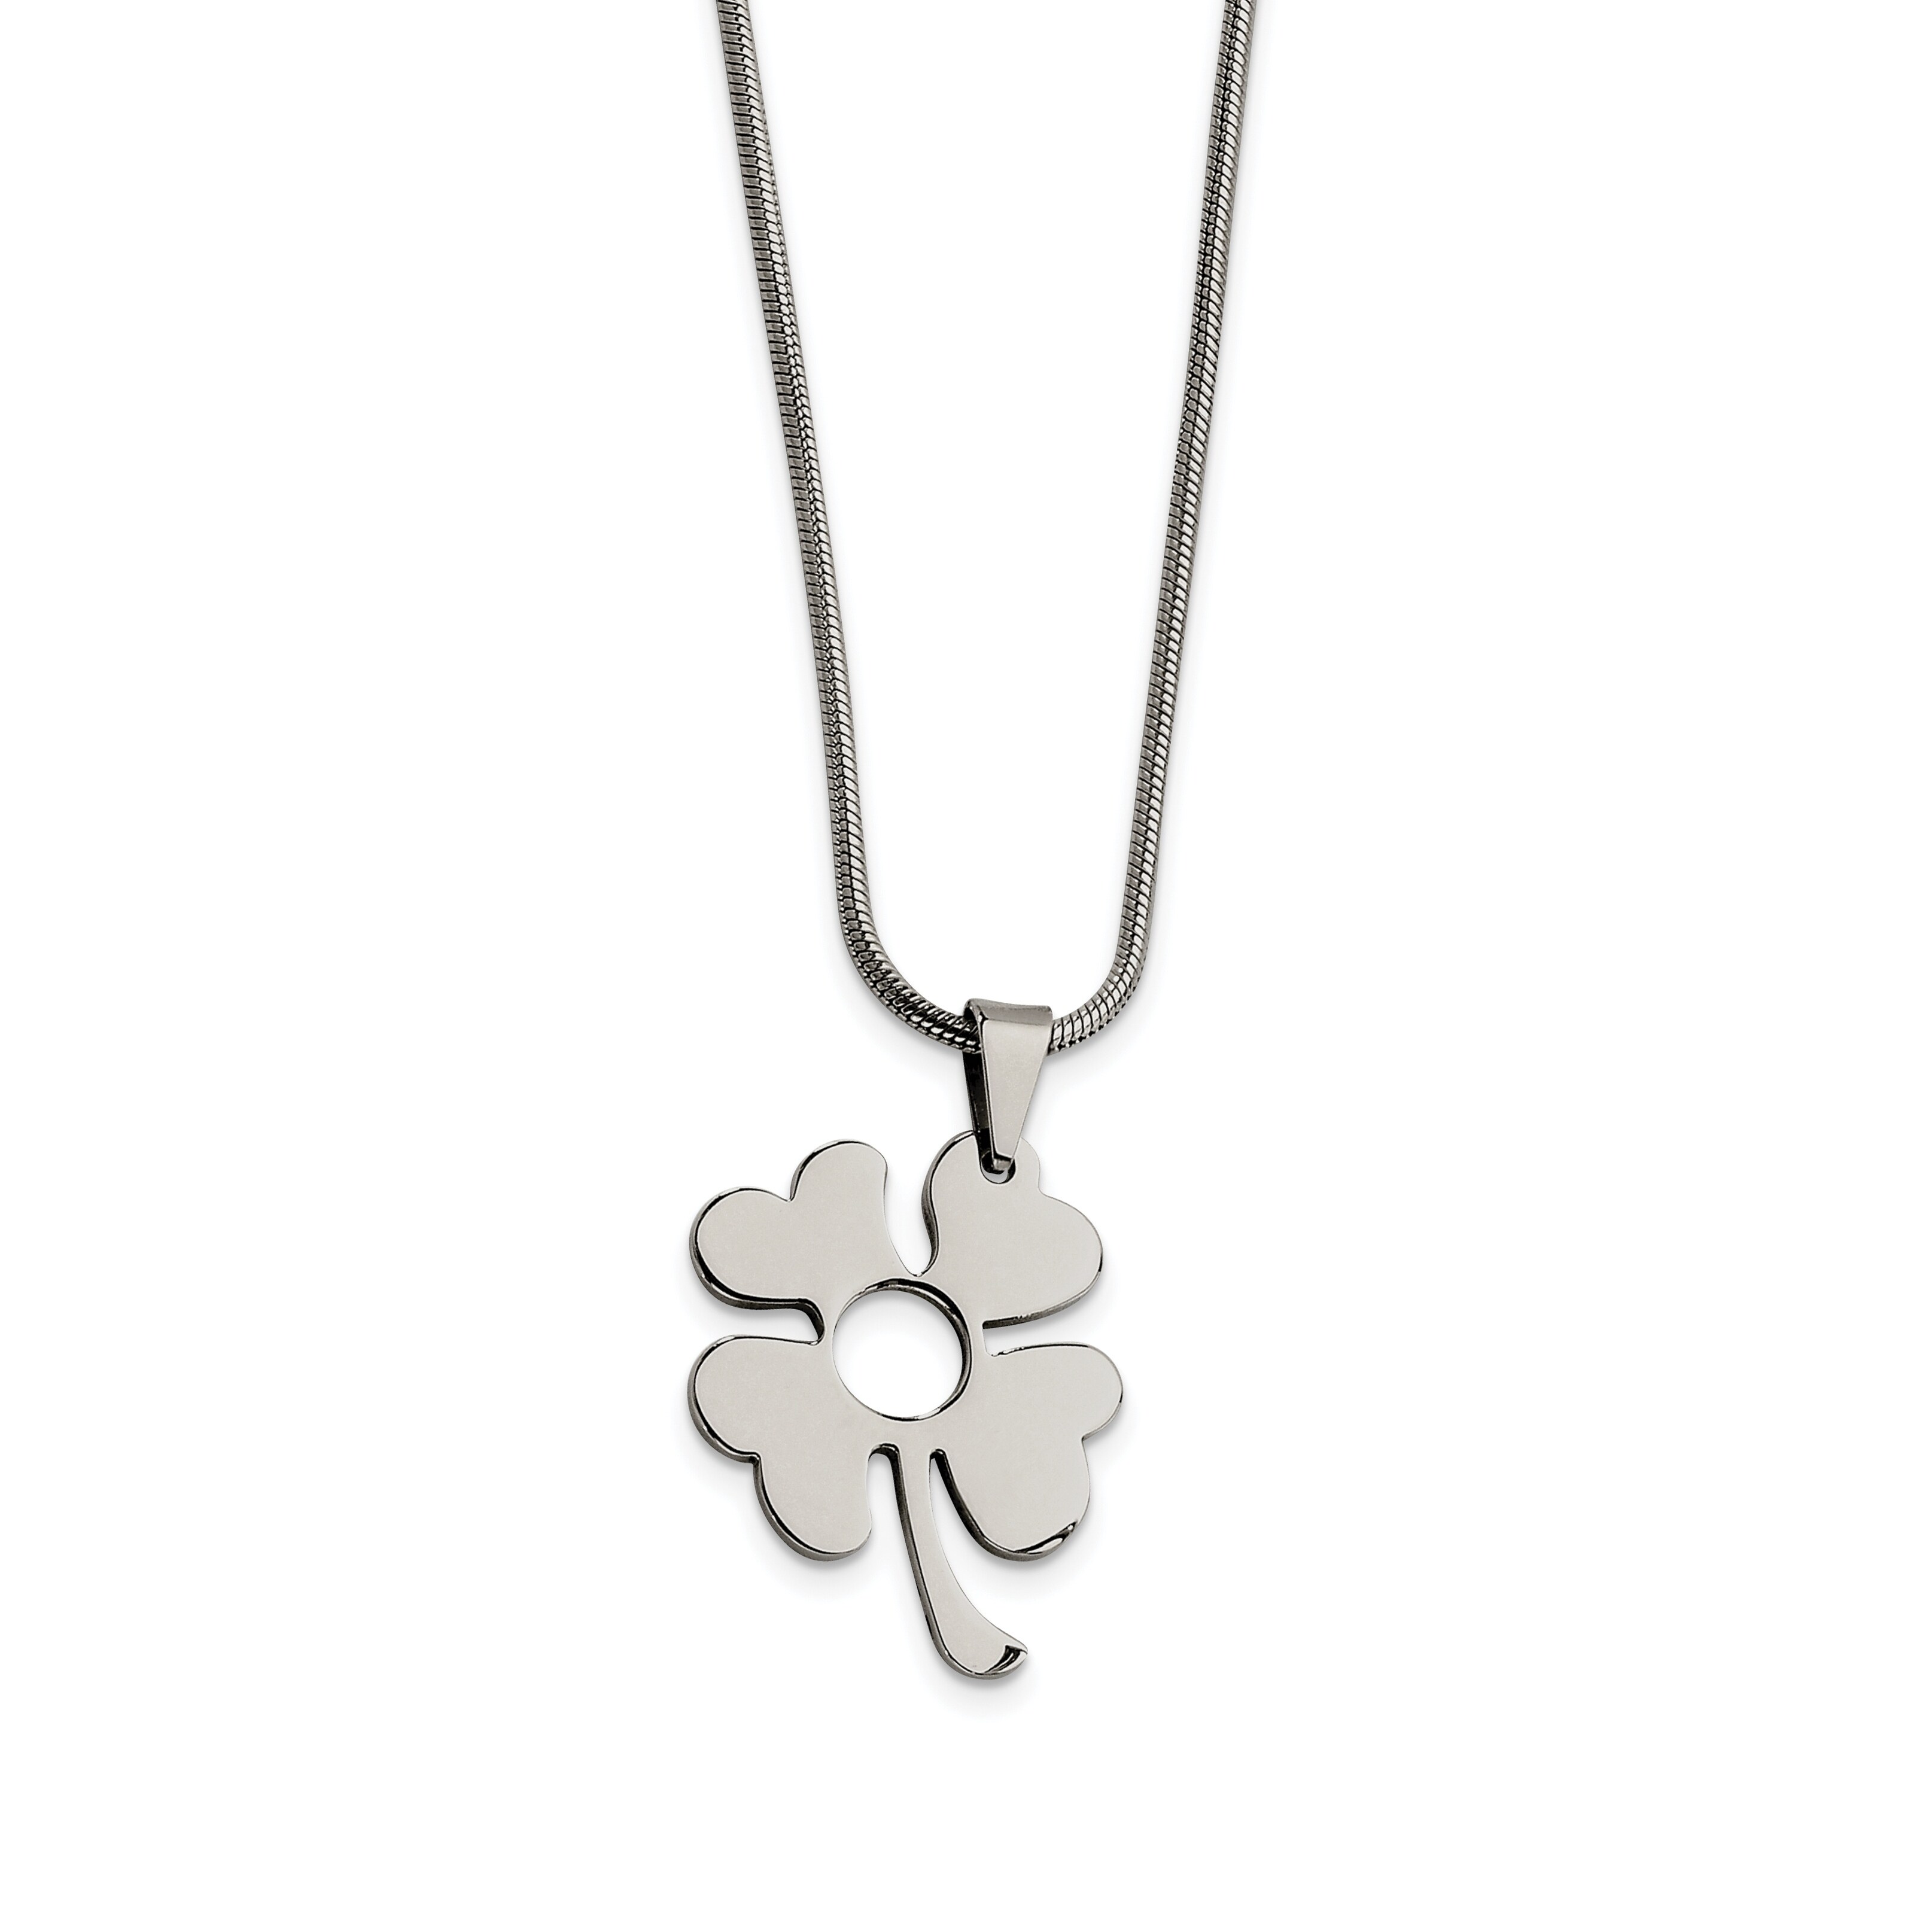 ELYA Stainless Steel Crystal Heart Clover Pendant Necklace 